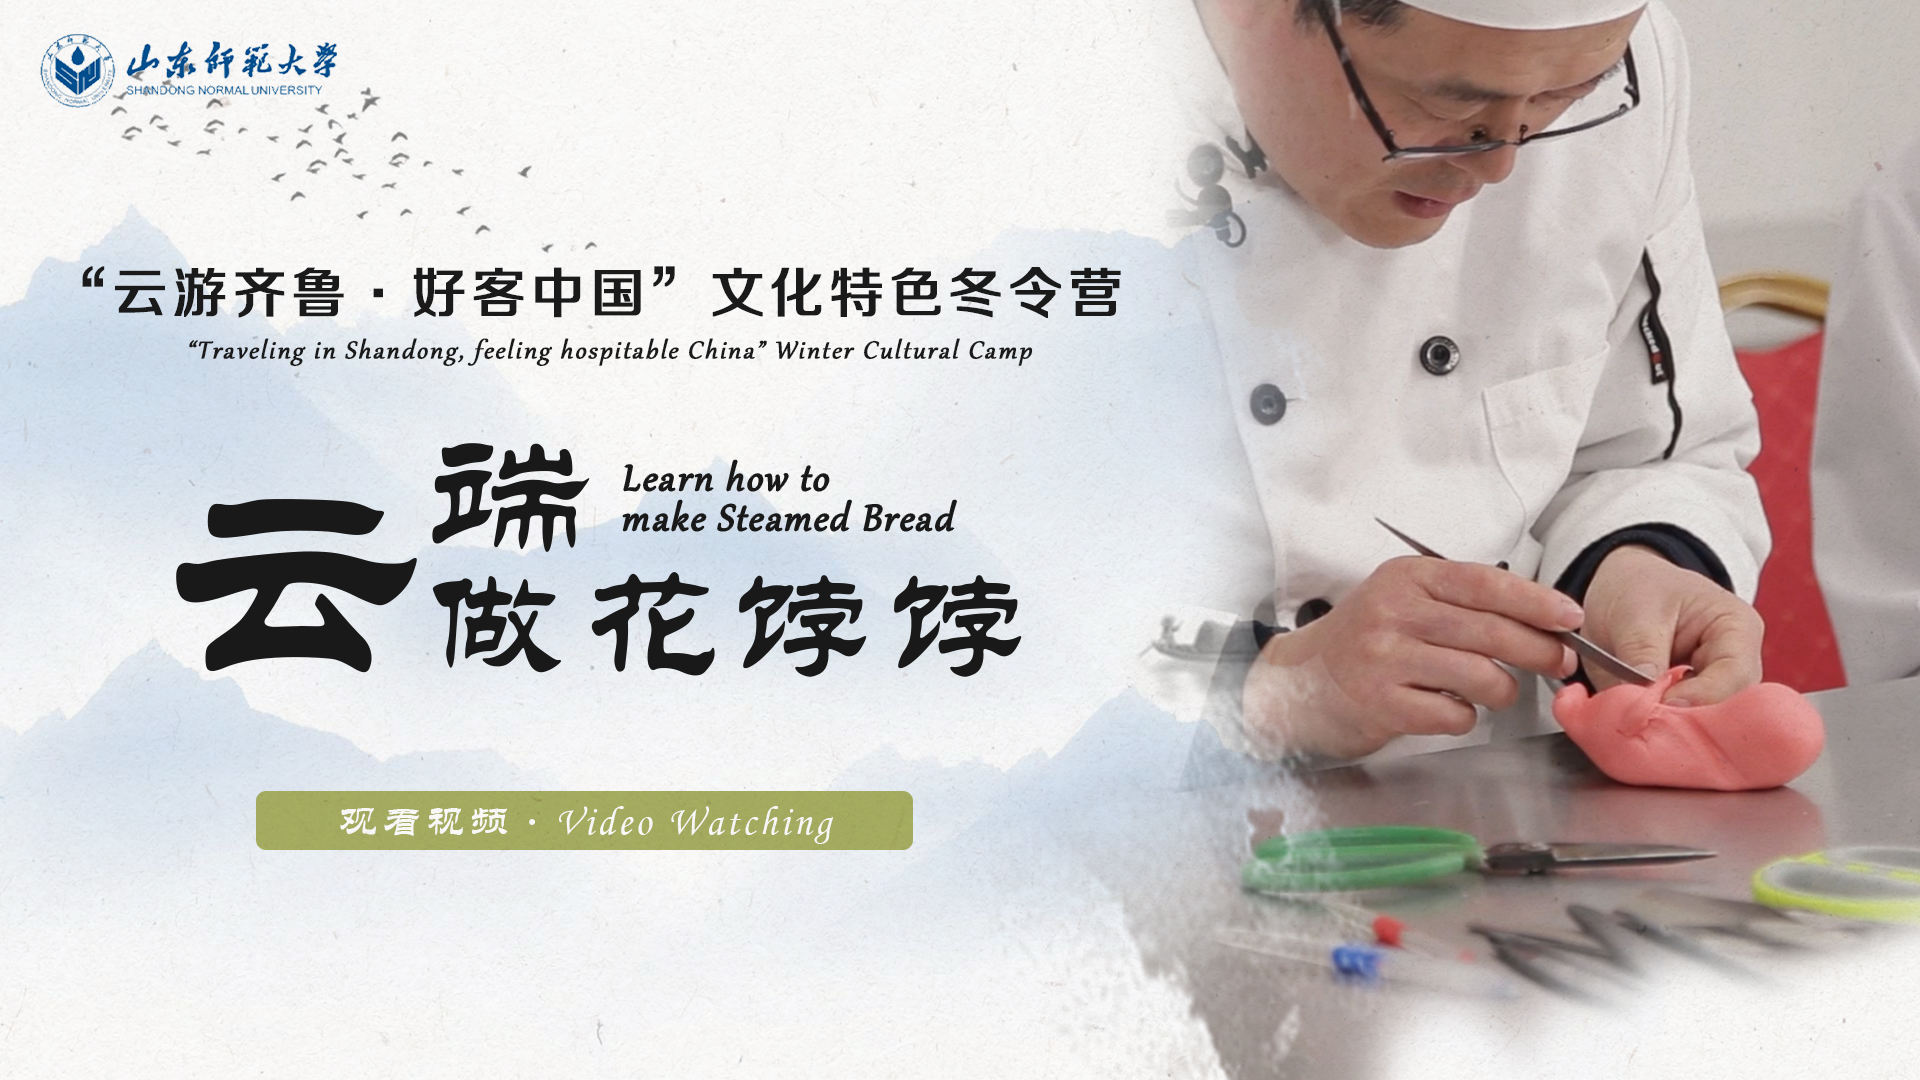 Learn how to make Steamed Bread